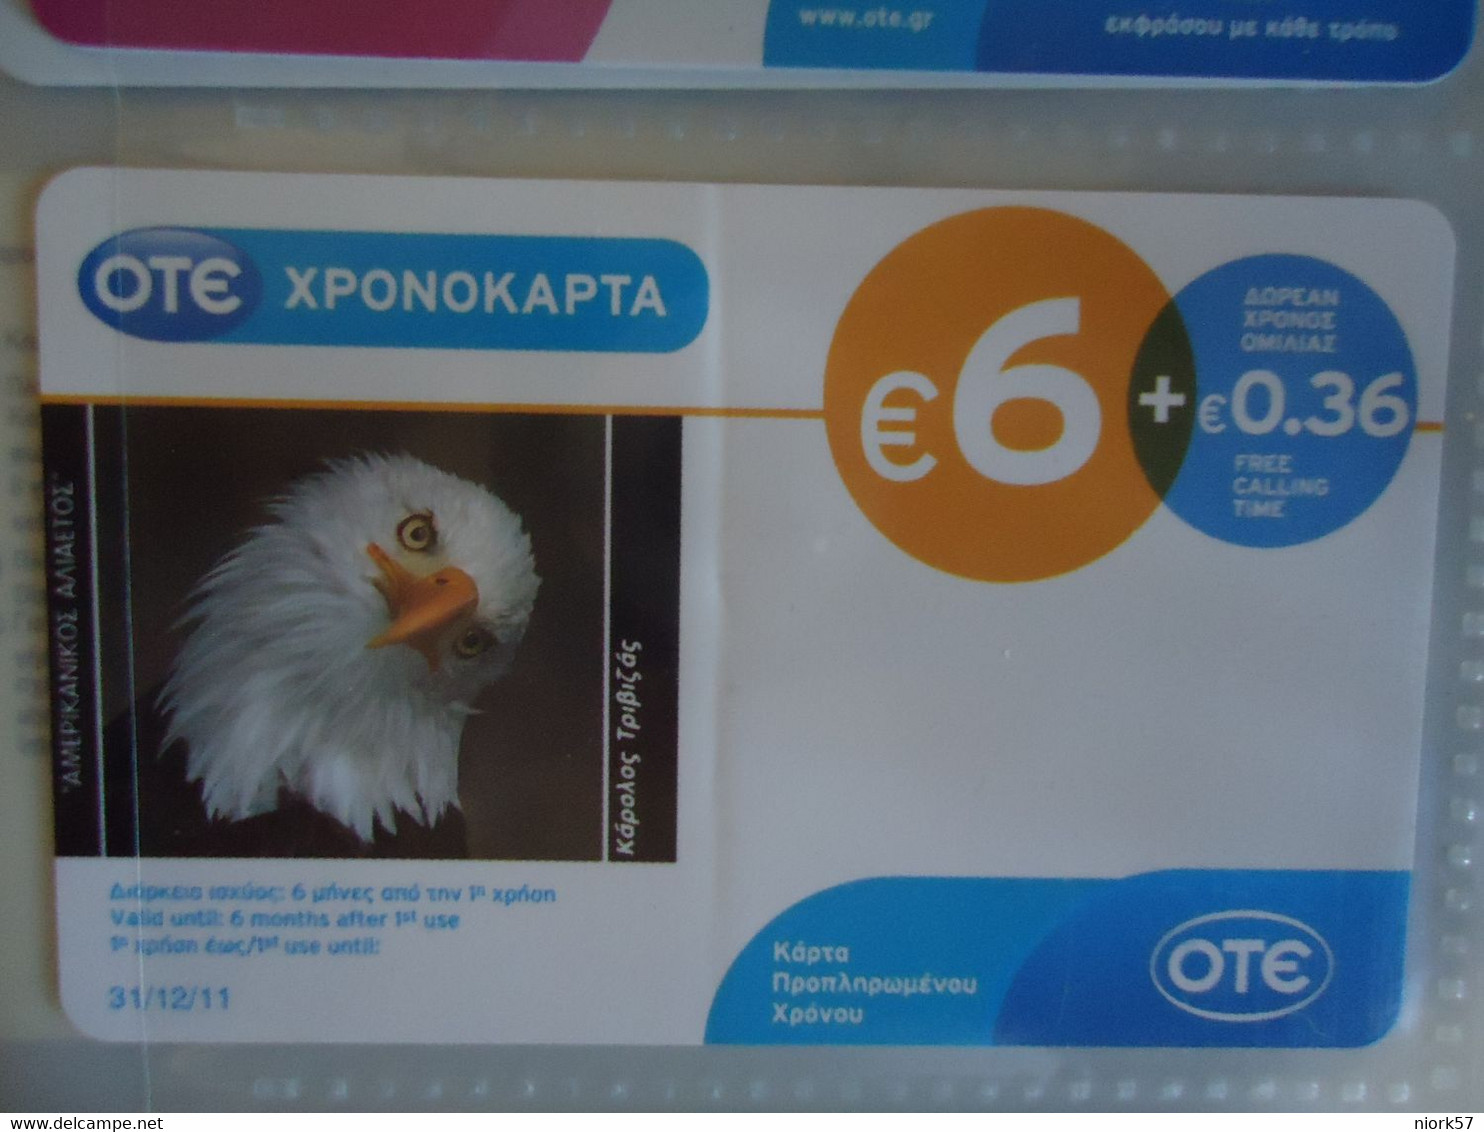 GREECE USED PREPAID CARDS BIRDS EAGLES - Arenden & Roofvogels